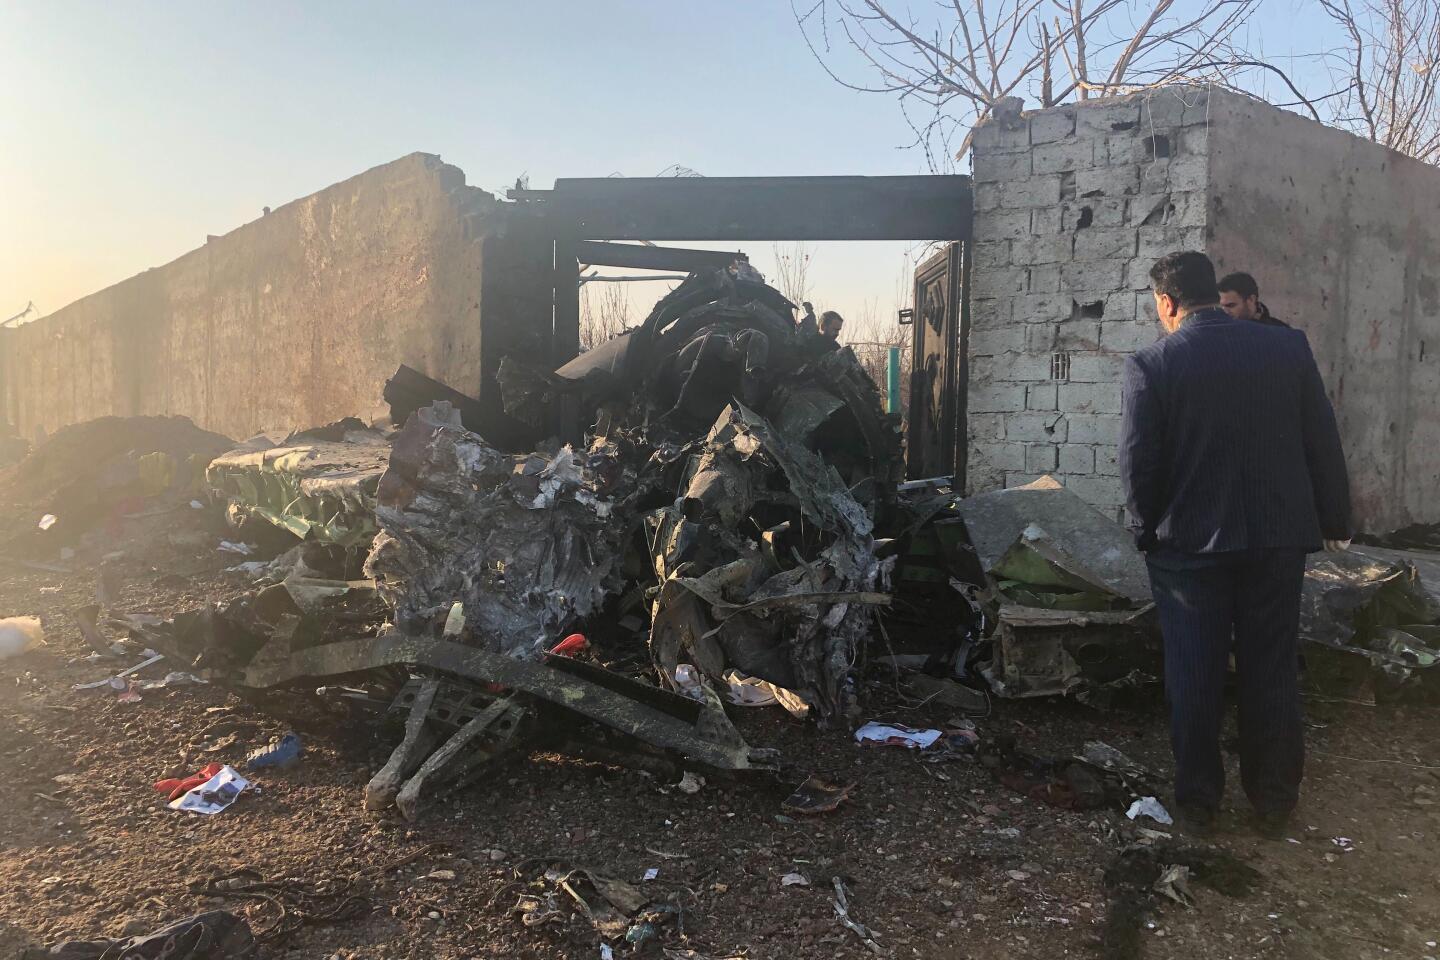 People observe some of the debris on Wednesday. The plane had taken off from Imam Khomeini International Airport in the Iranian capital when a fire struck one of its engines.